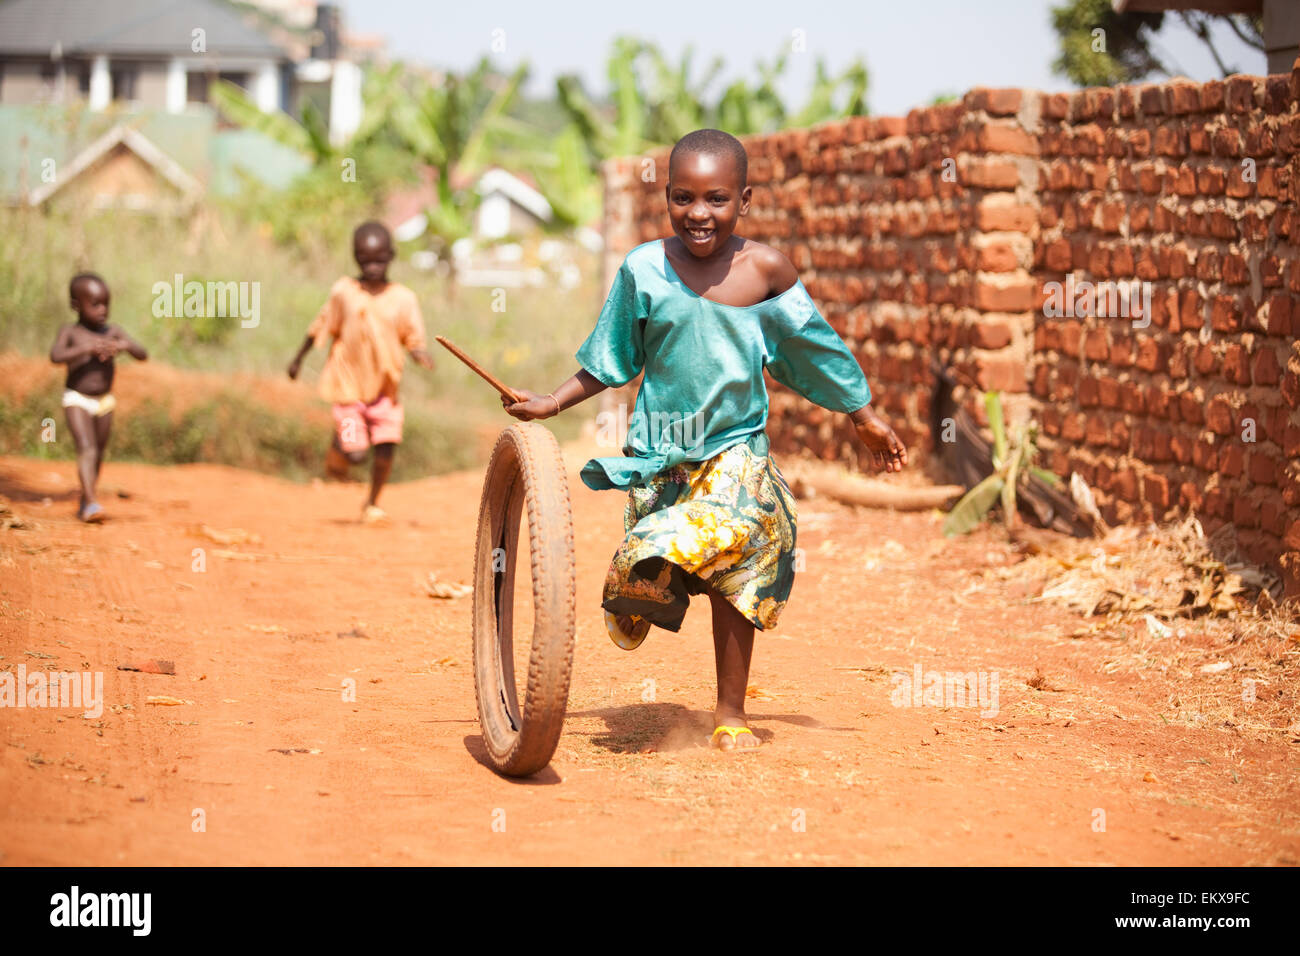 African Poor Boys Play with Wheels Editorial Stock Image - Image